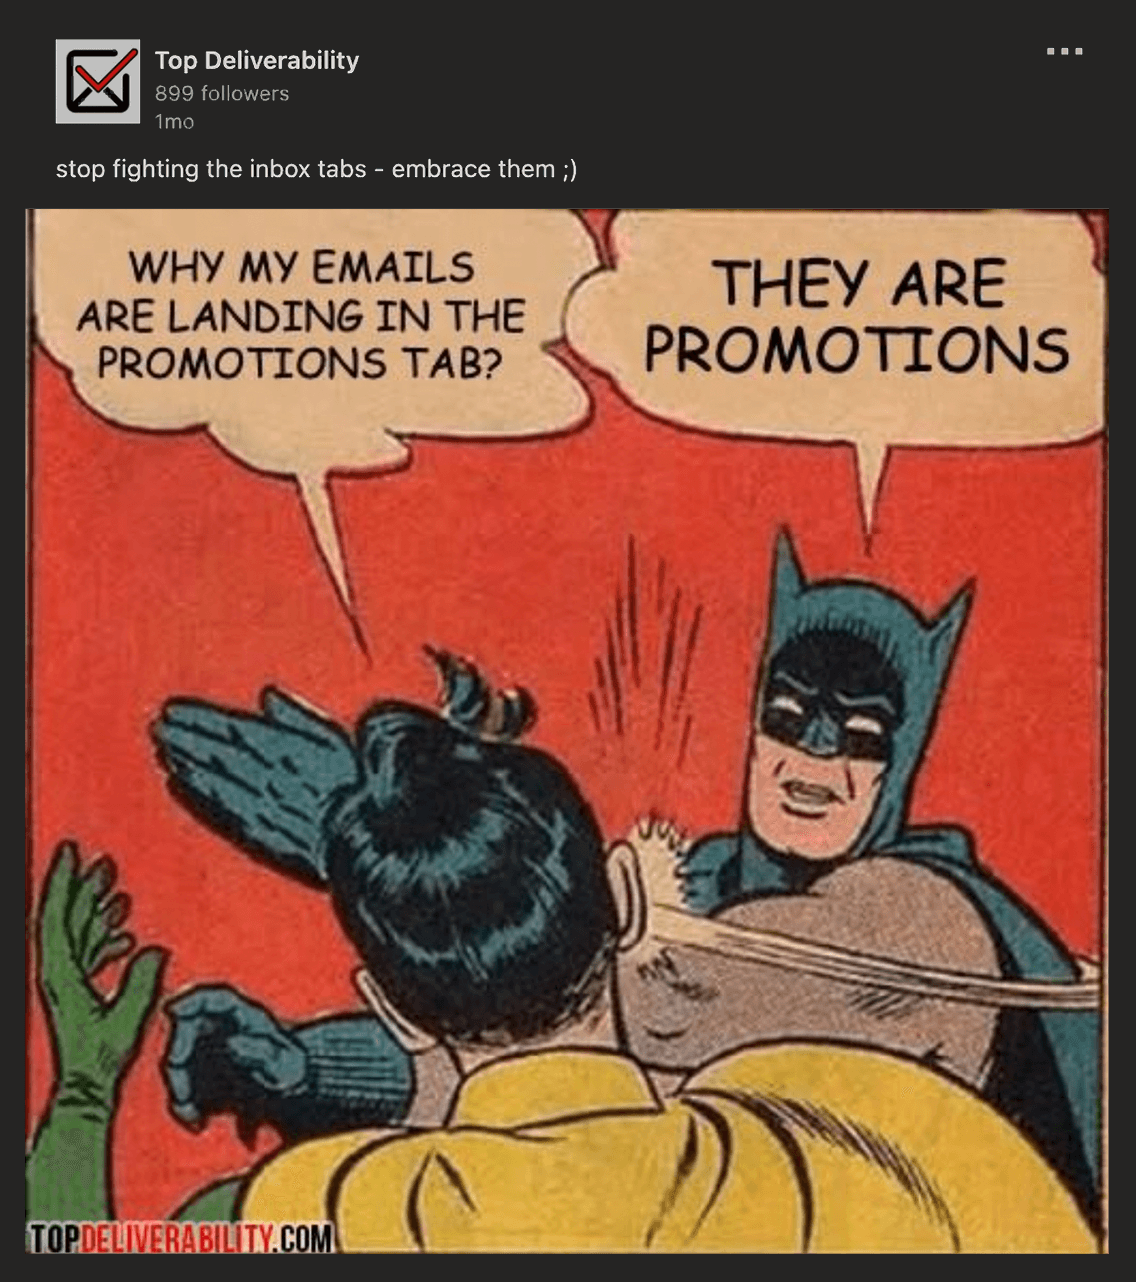 Top Deliverability on LinkedIn says, 'stop fighting the inbox tabs - embrace them' with a Batman comic strip meme that says, 'Why my emails are landing in the promotions tab?' 'They are promotions'